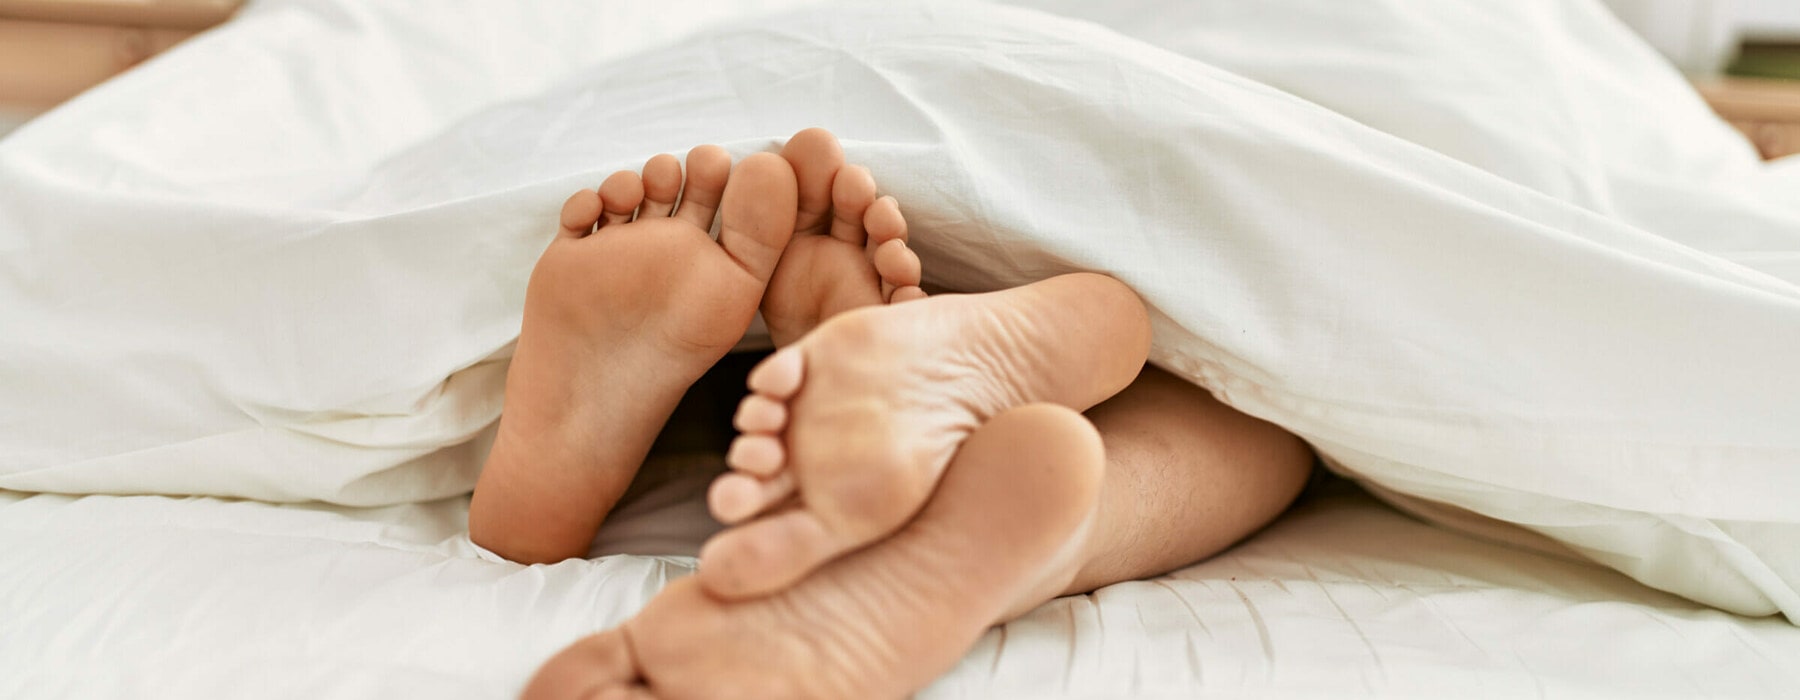 Couple,Feet,Under,Sheets,On,The,Bed,At,Home.